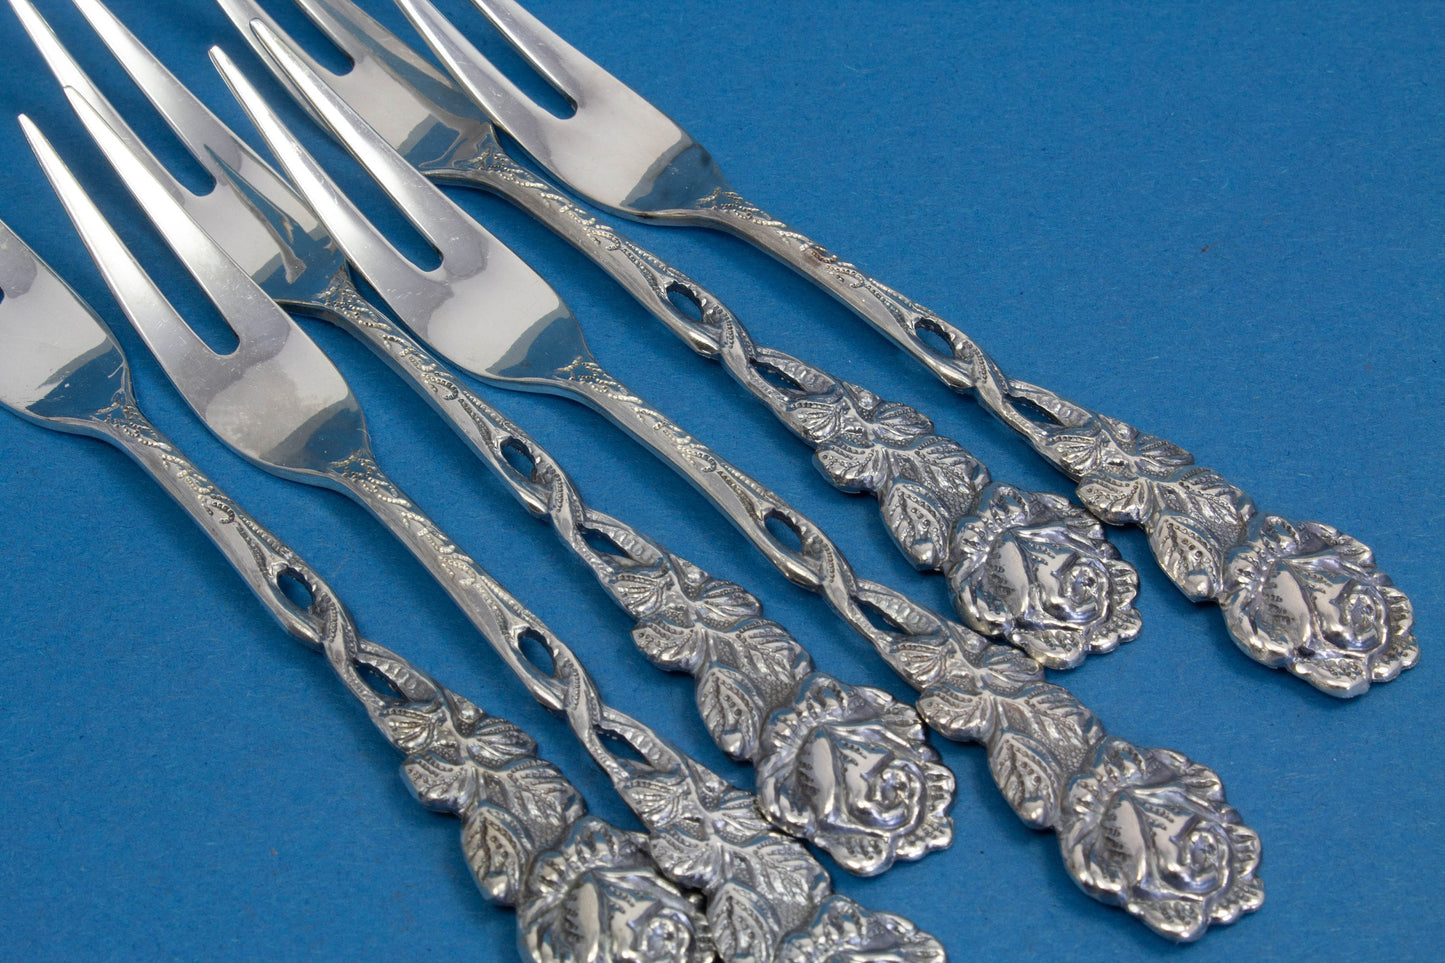 6 cocktail forks, small skewers